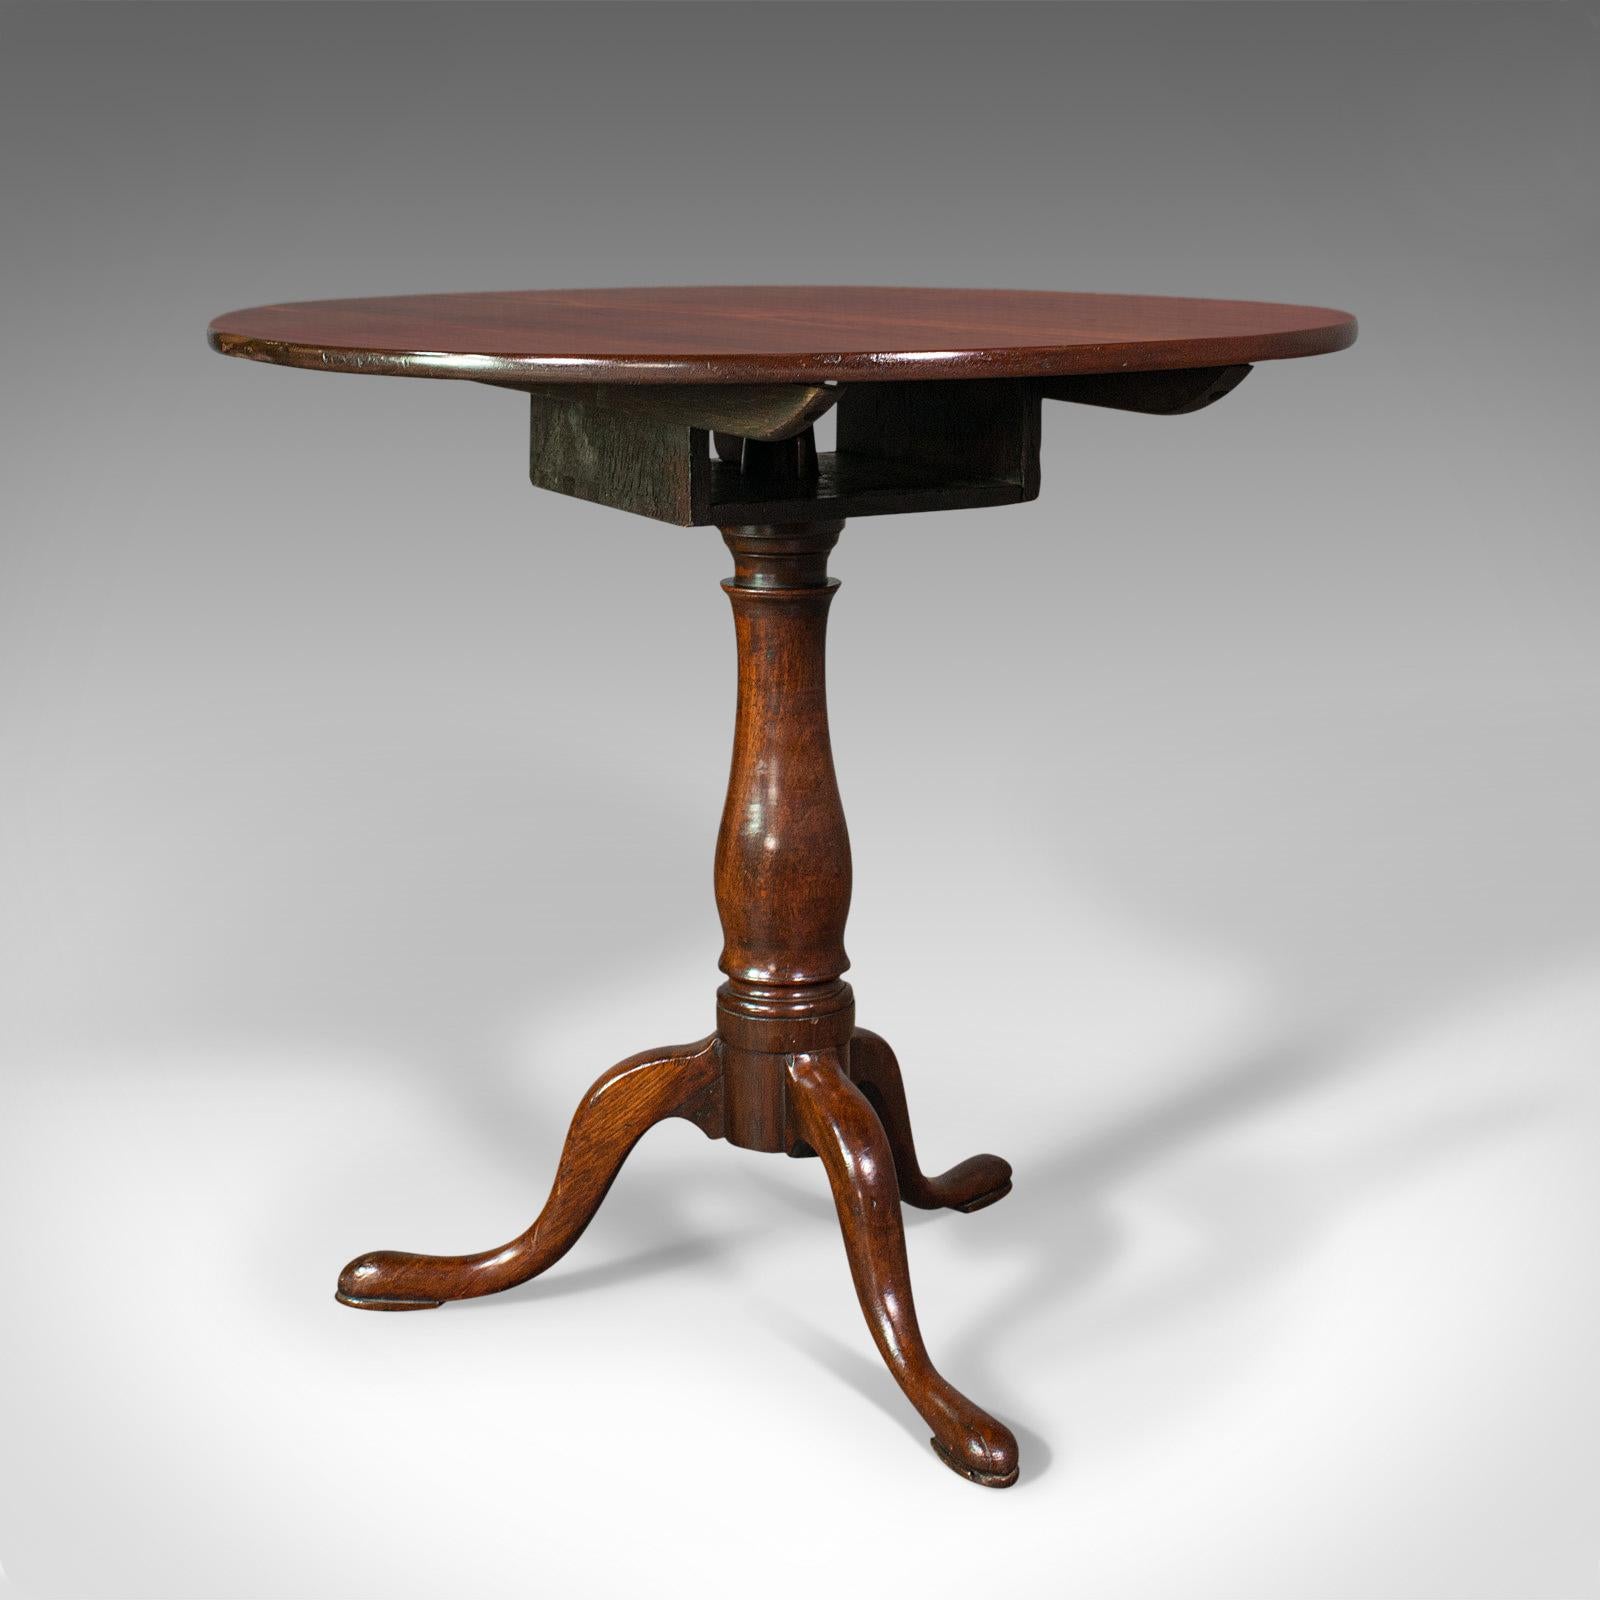 This is an antique tilt top table. An English, mahogany occasional or wine table with birdcage mount, dating to the Georgian period and later, circa 1780.

Of pleasing form and quality finish
Displays a desirable aged patina and in good